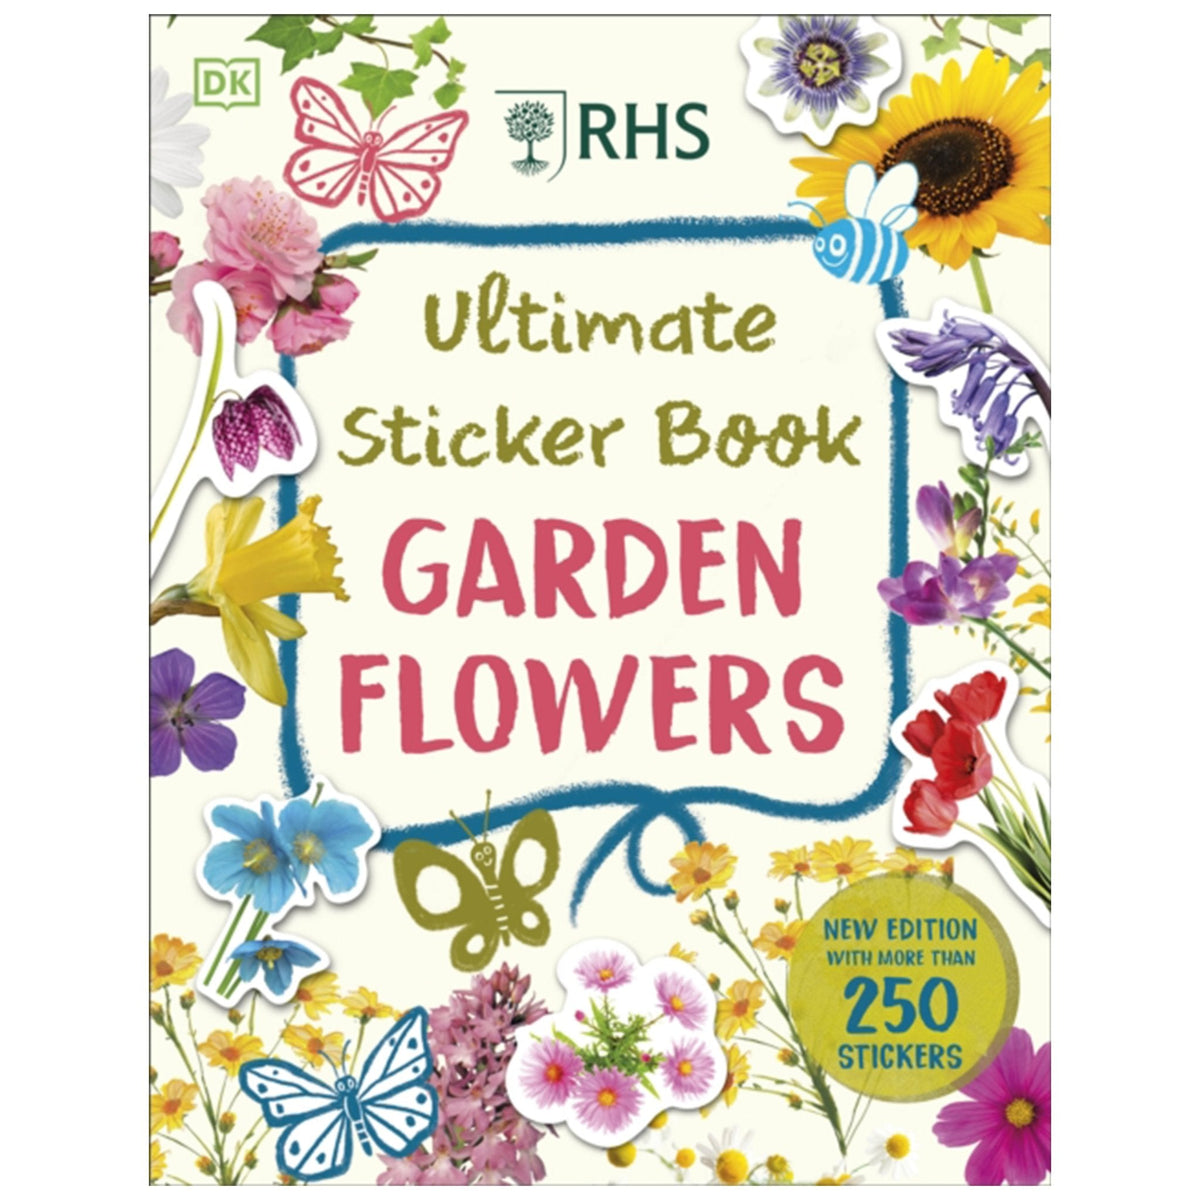 RHS Ultimate Sticker Book Garden Flowers: New Edition with More than 250 Stickers - boo•kay ldn